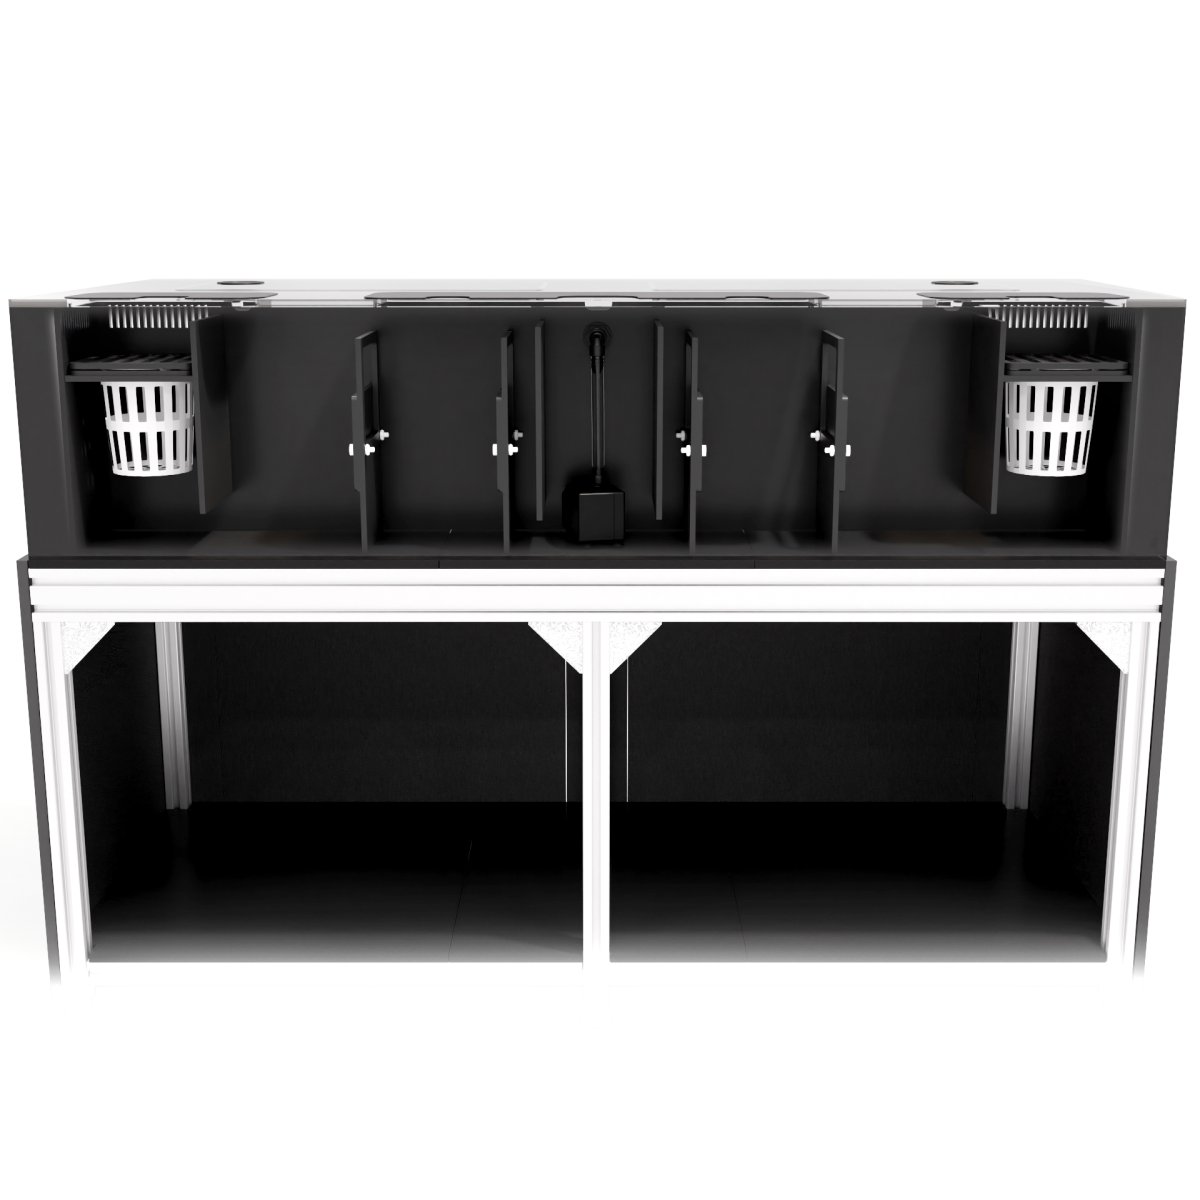 72x30x16 AIO Lagoon Package - black with stand - BACK.jpg